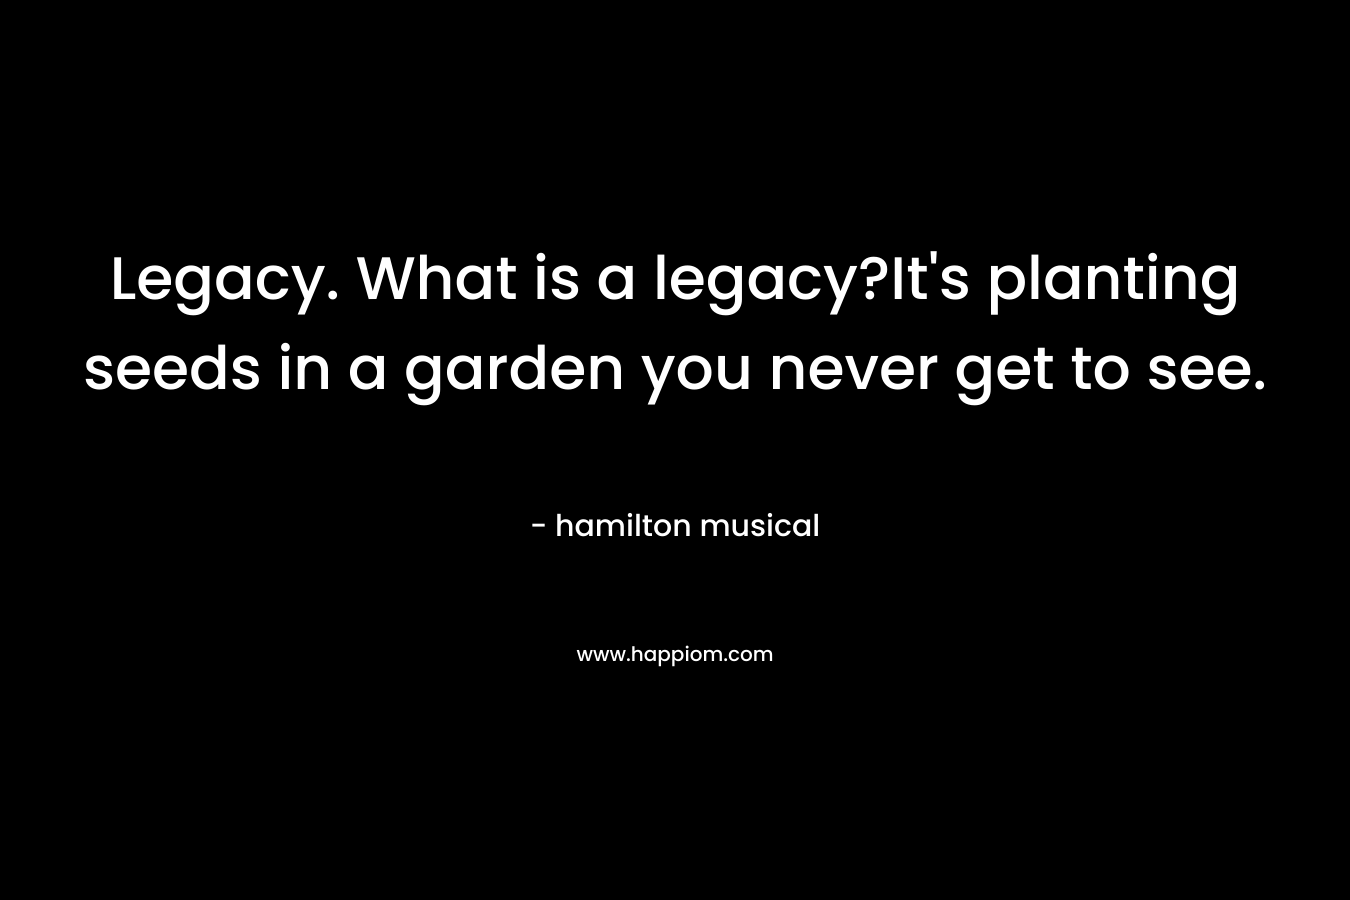 Legacy. What is a legacy?It’s planting seeds in a garden you never get to see. – hamilton musical